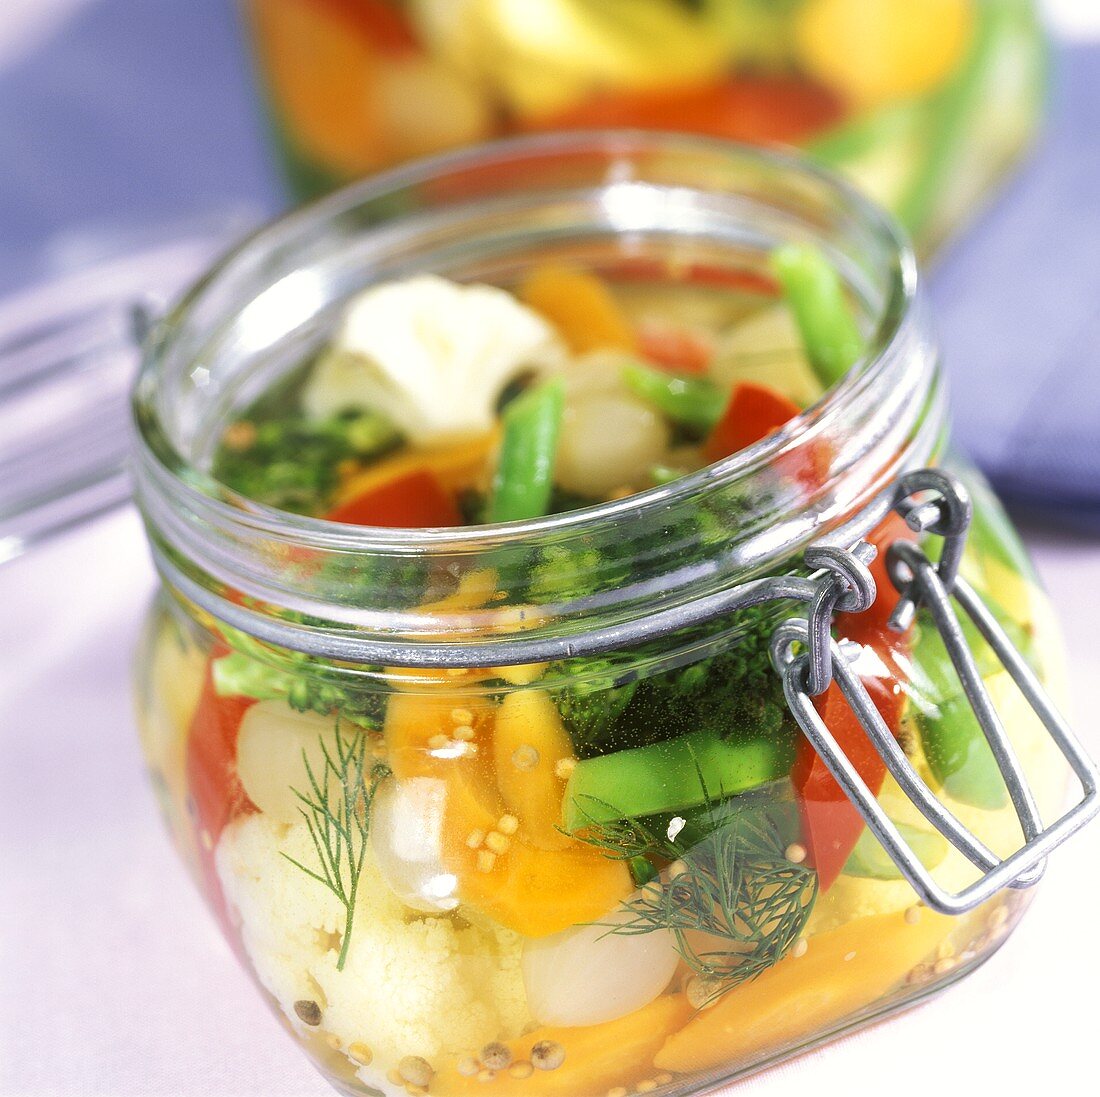 Mixed pickles in pickling jar